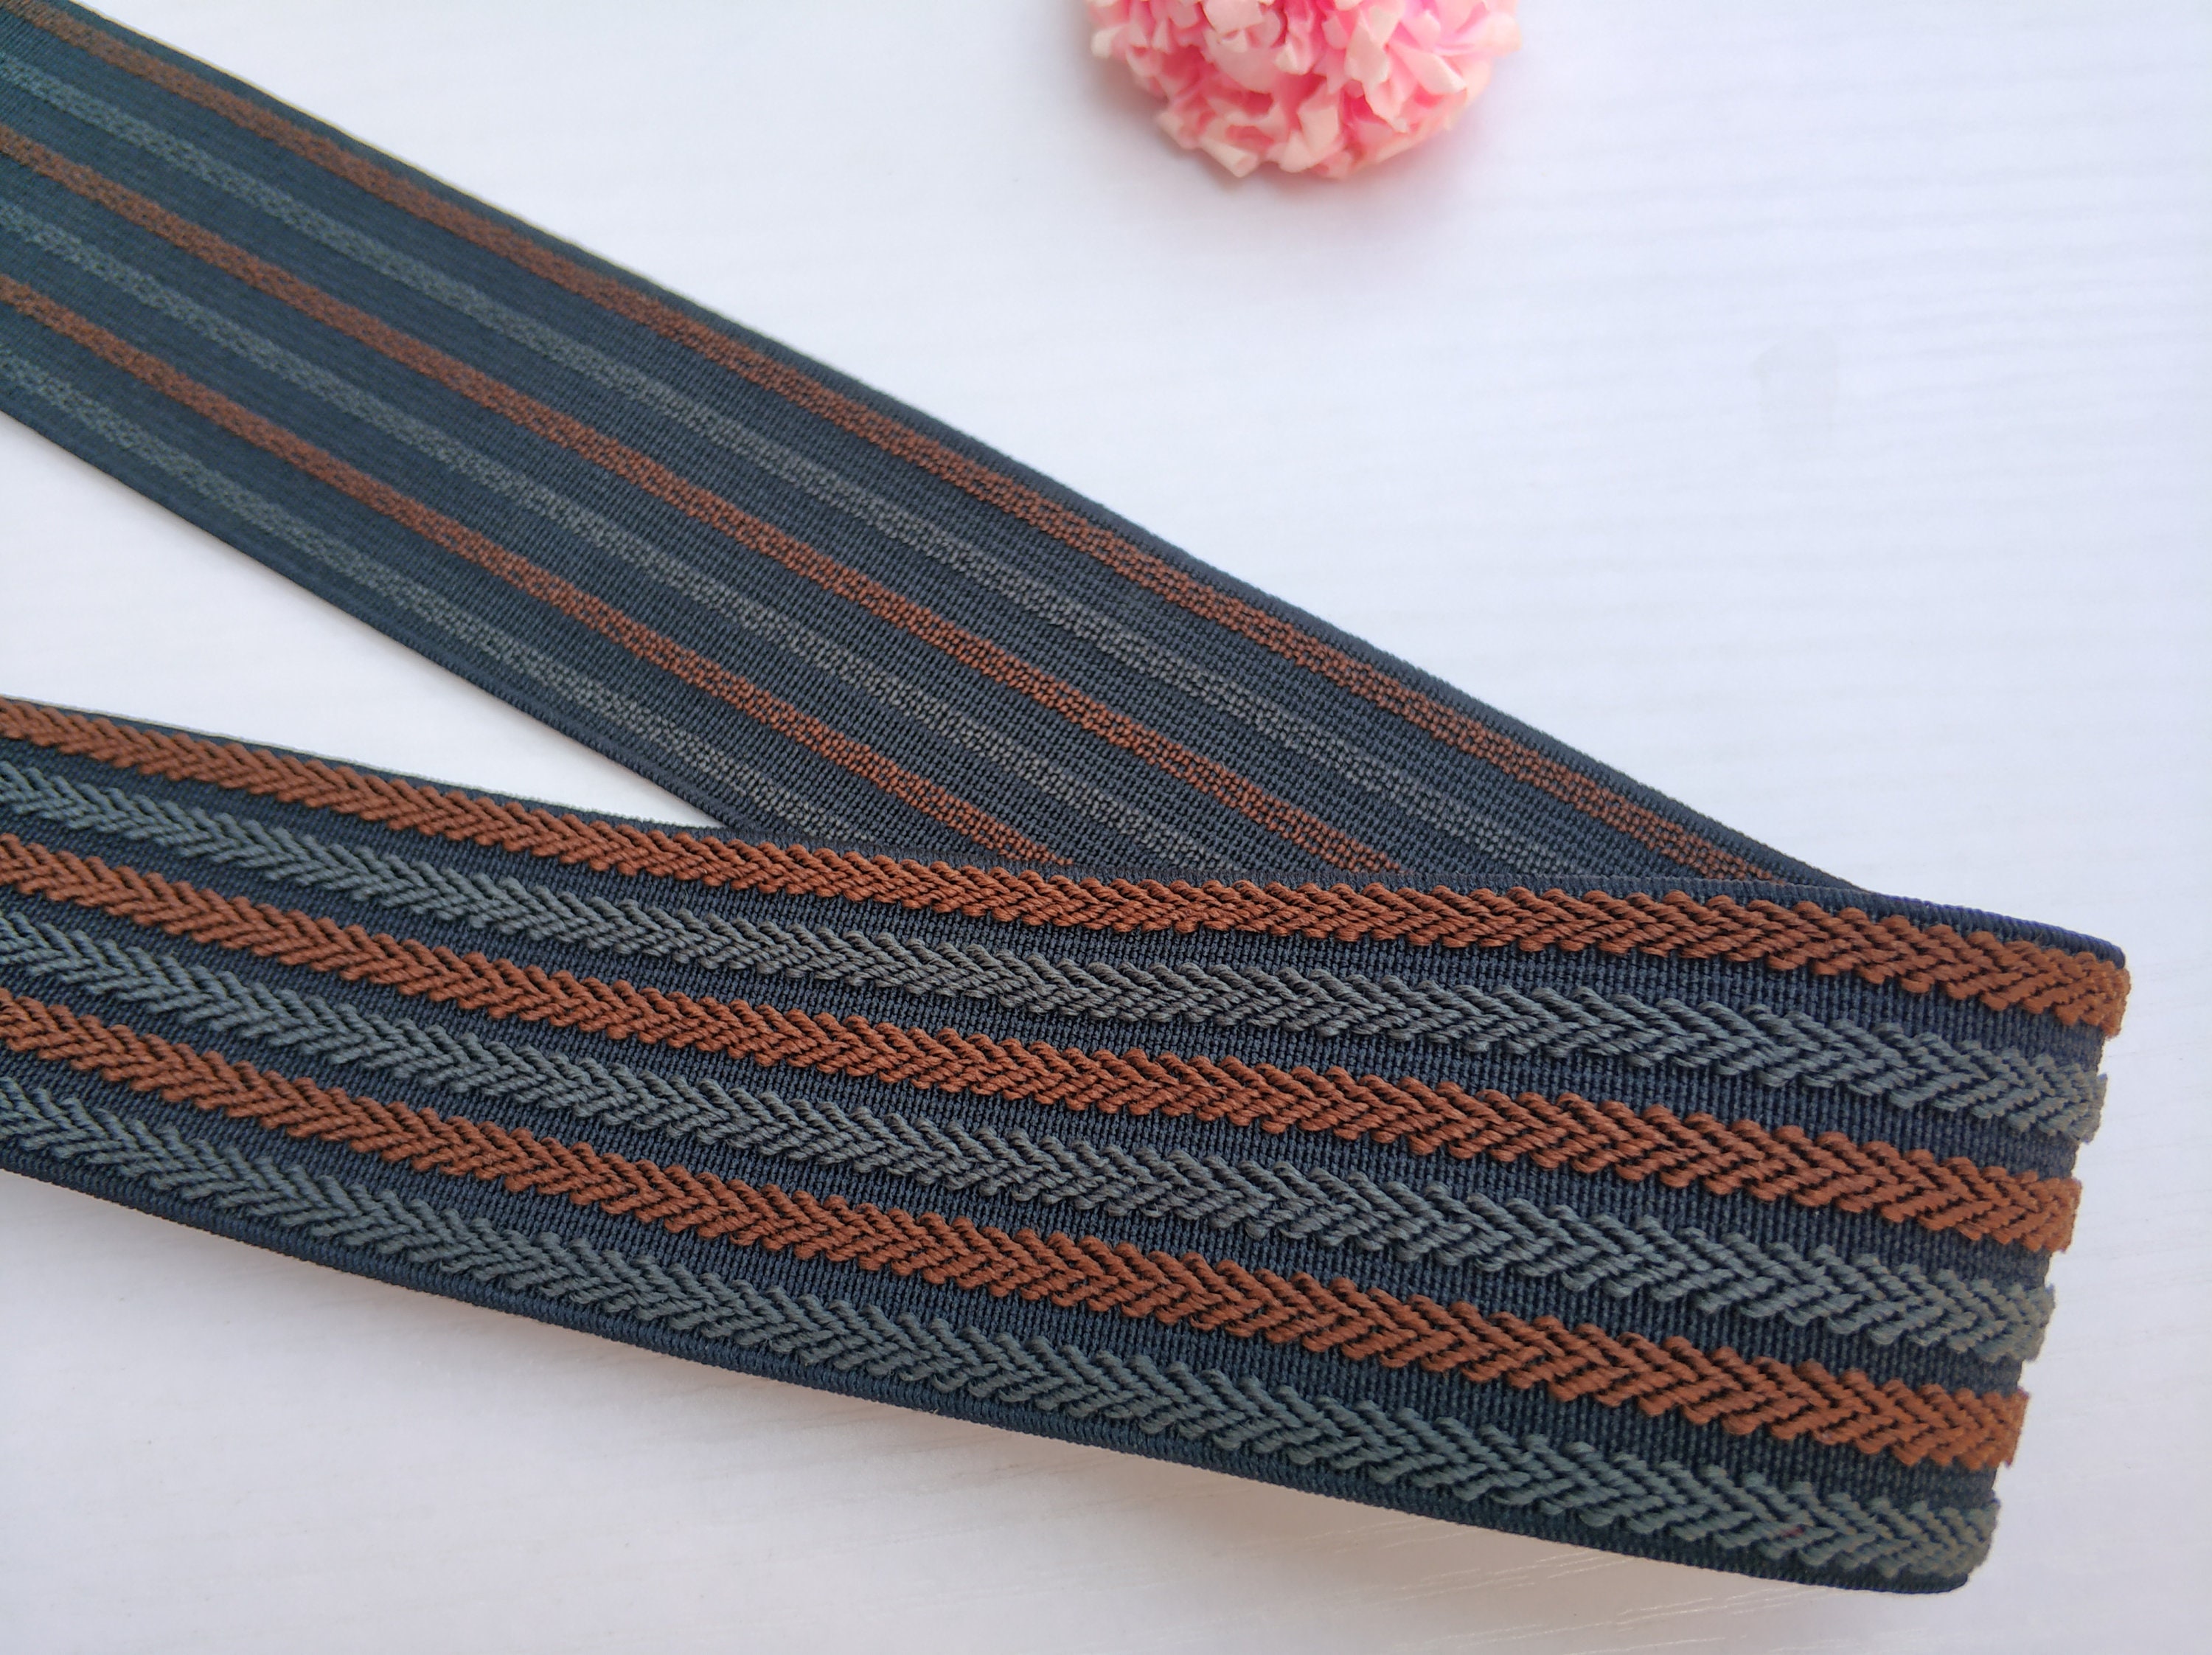 1.5'' 40mm Wide Navy and White Stripe Twill Elastic 